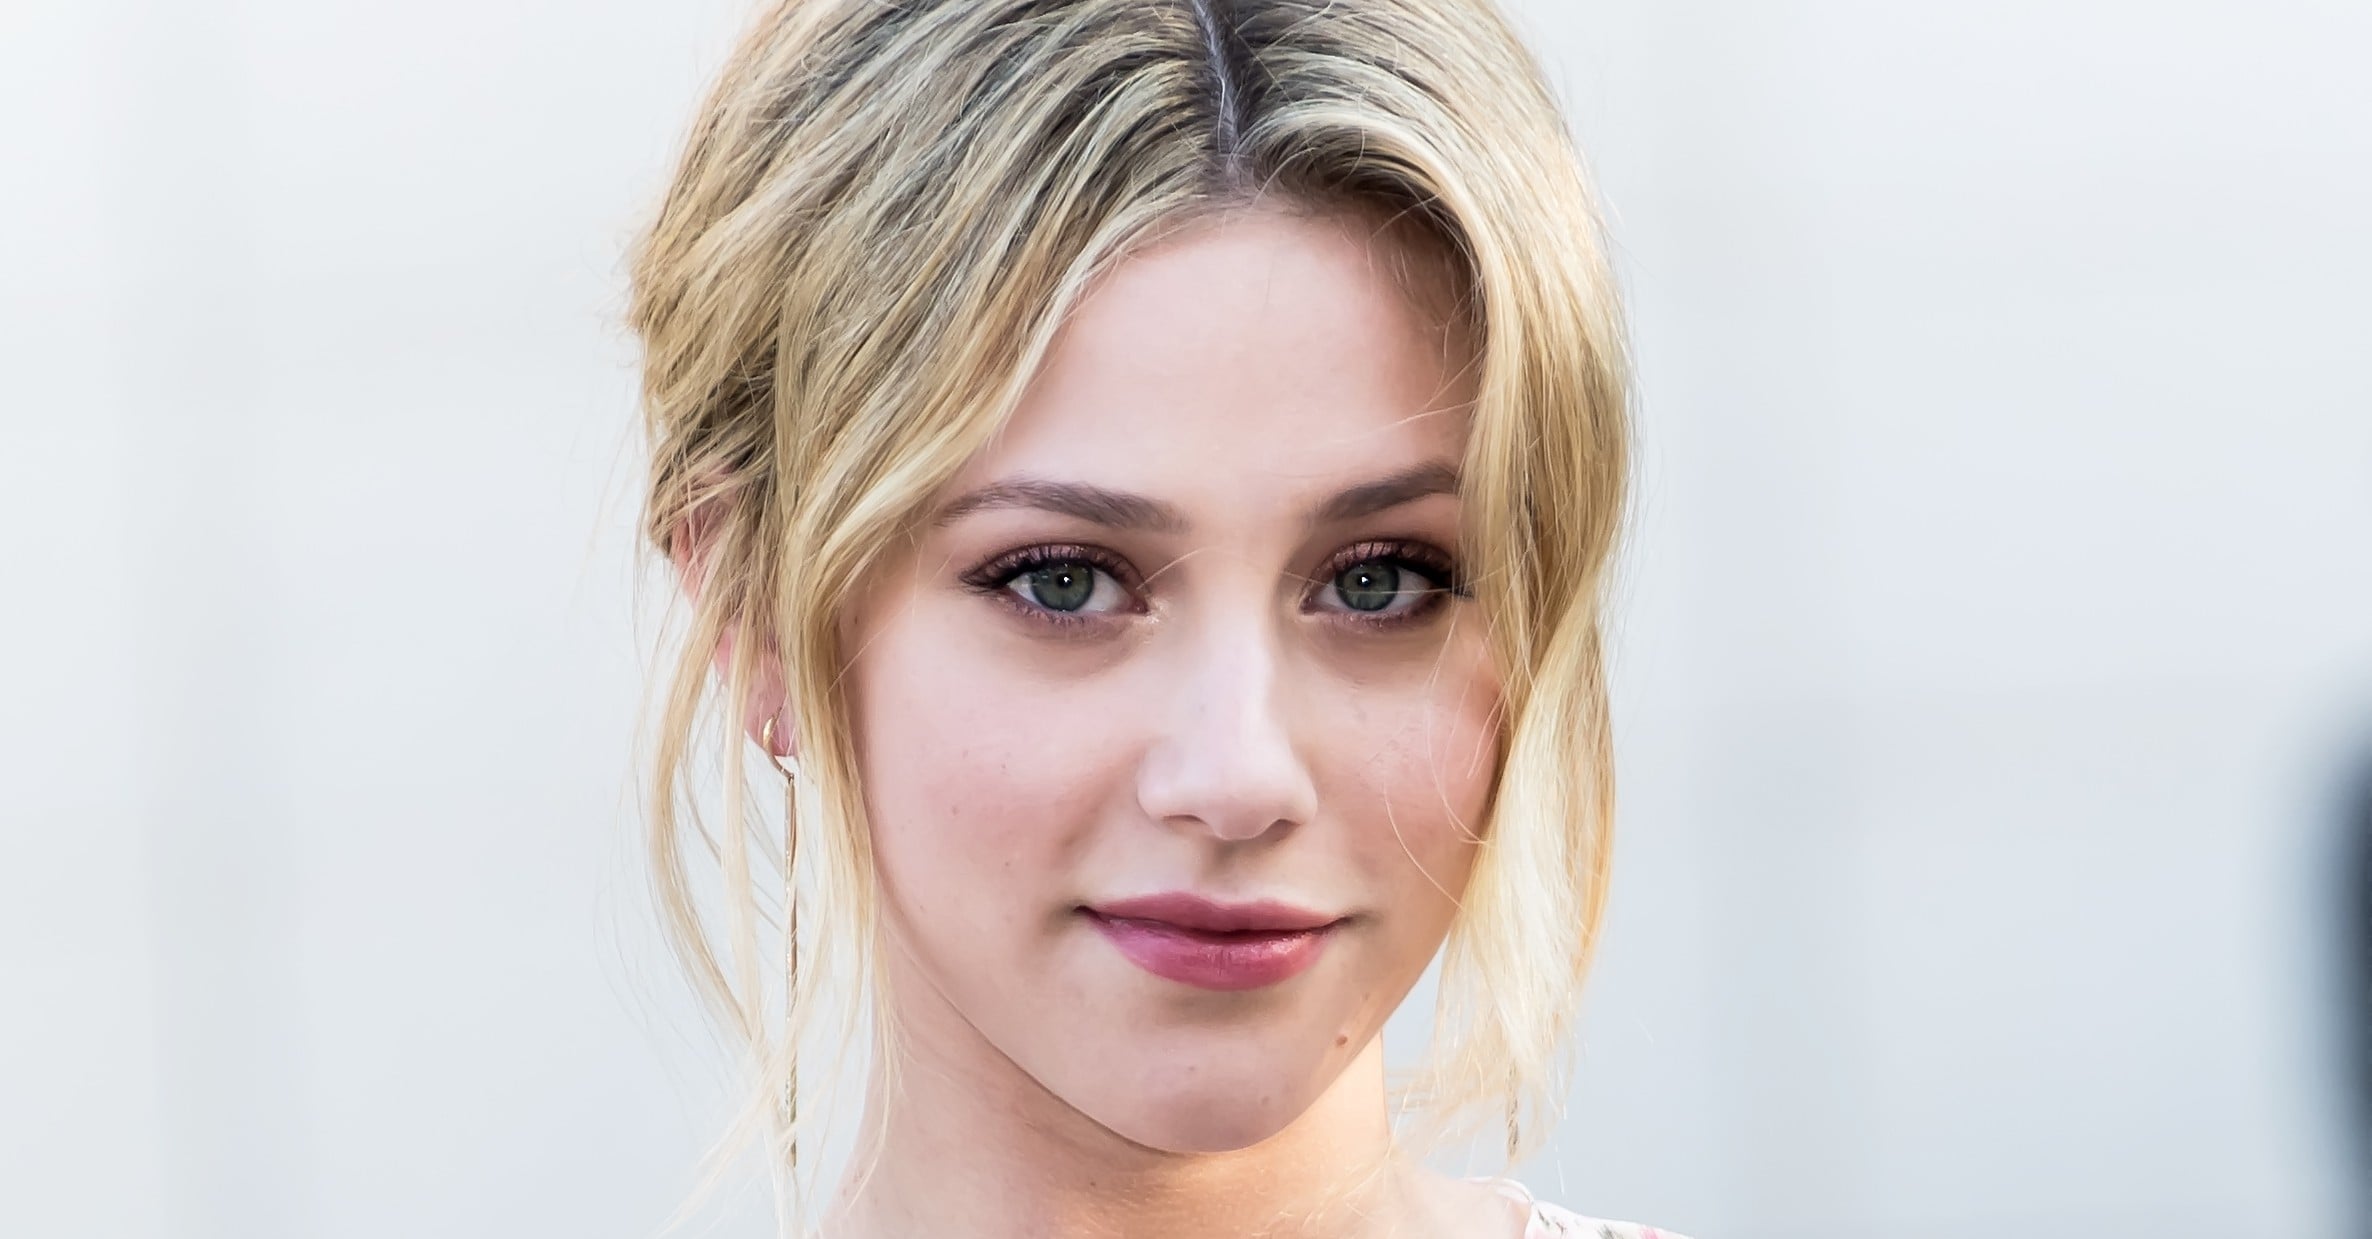 Lili Reinhart on the Makeup She Wears on Riverdale and Her Natural